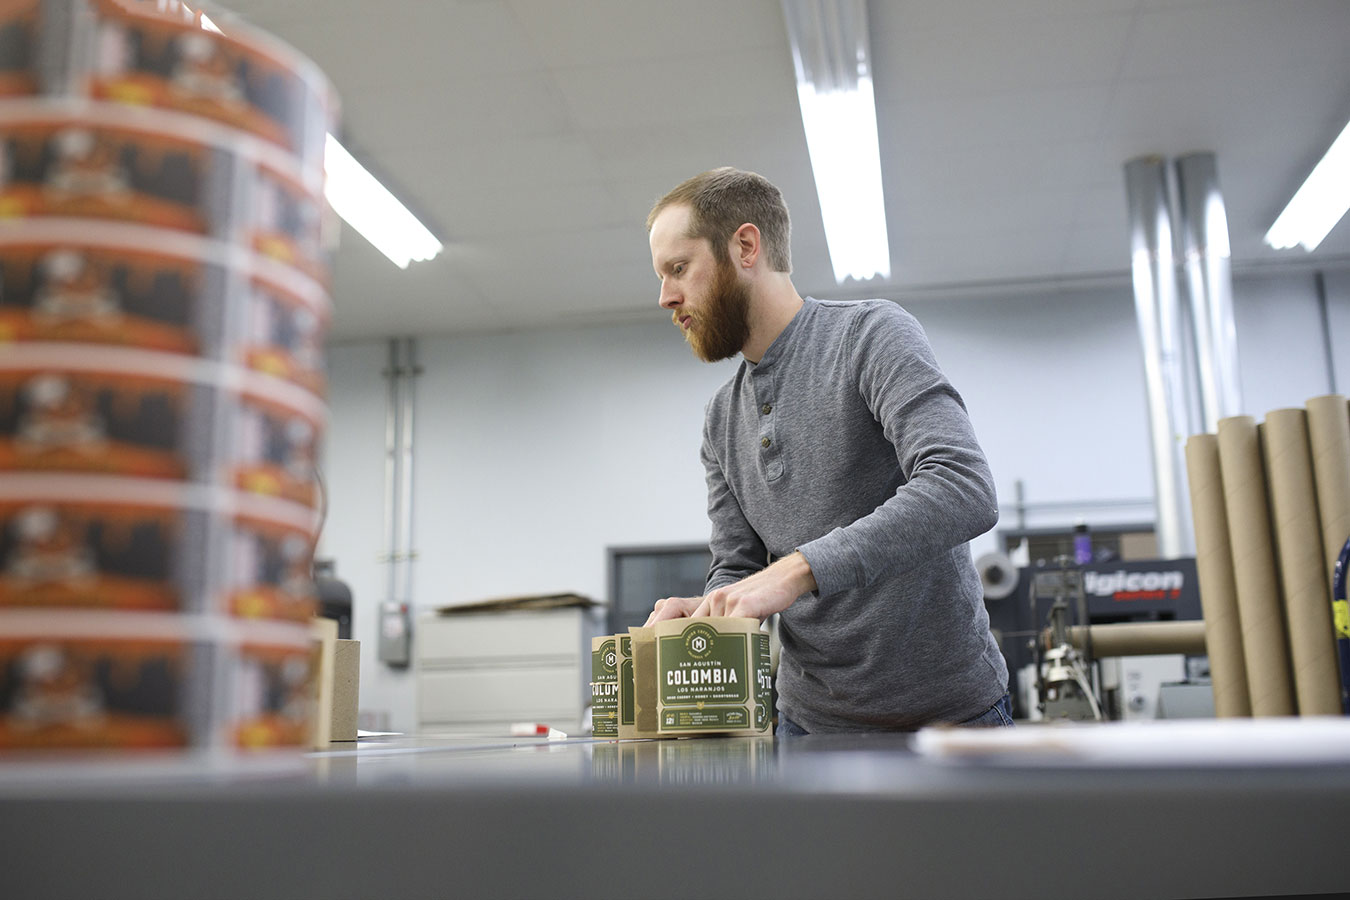 Digital printing company expert preparing labels for organic products.